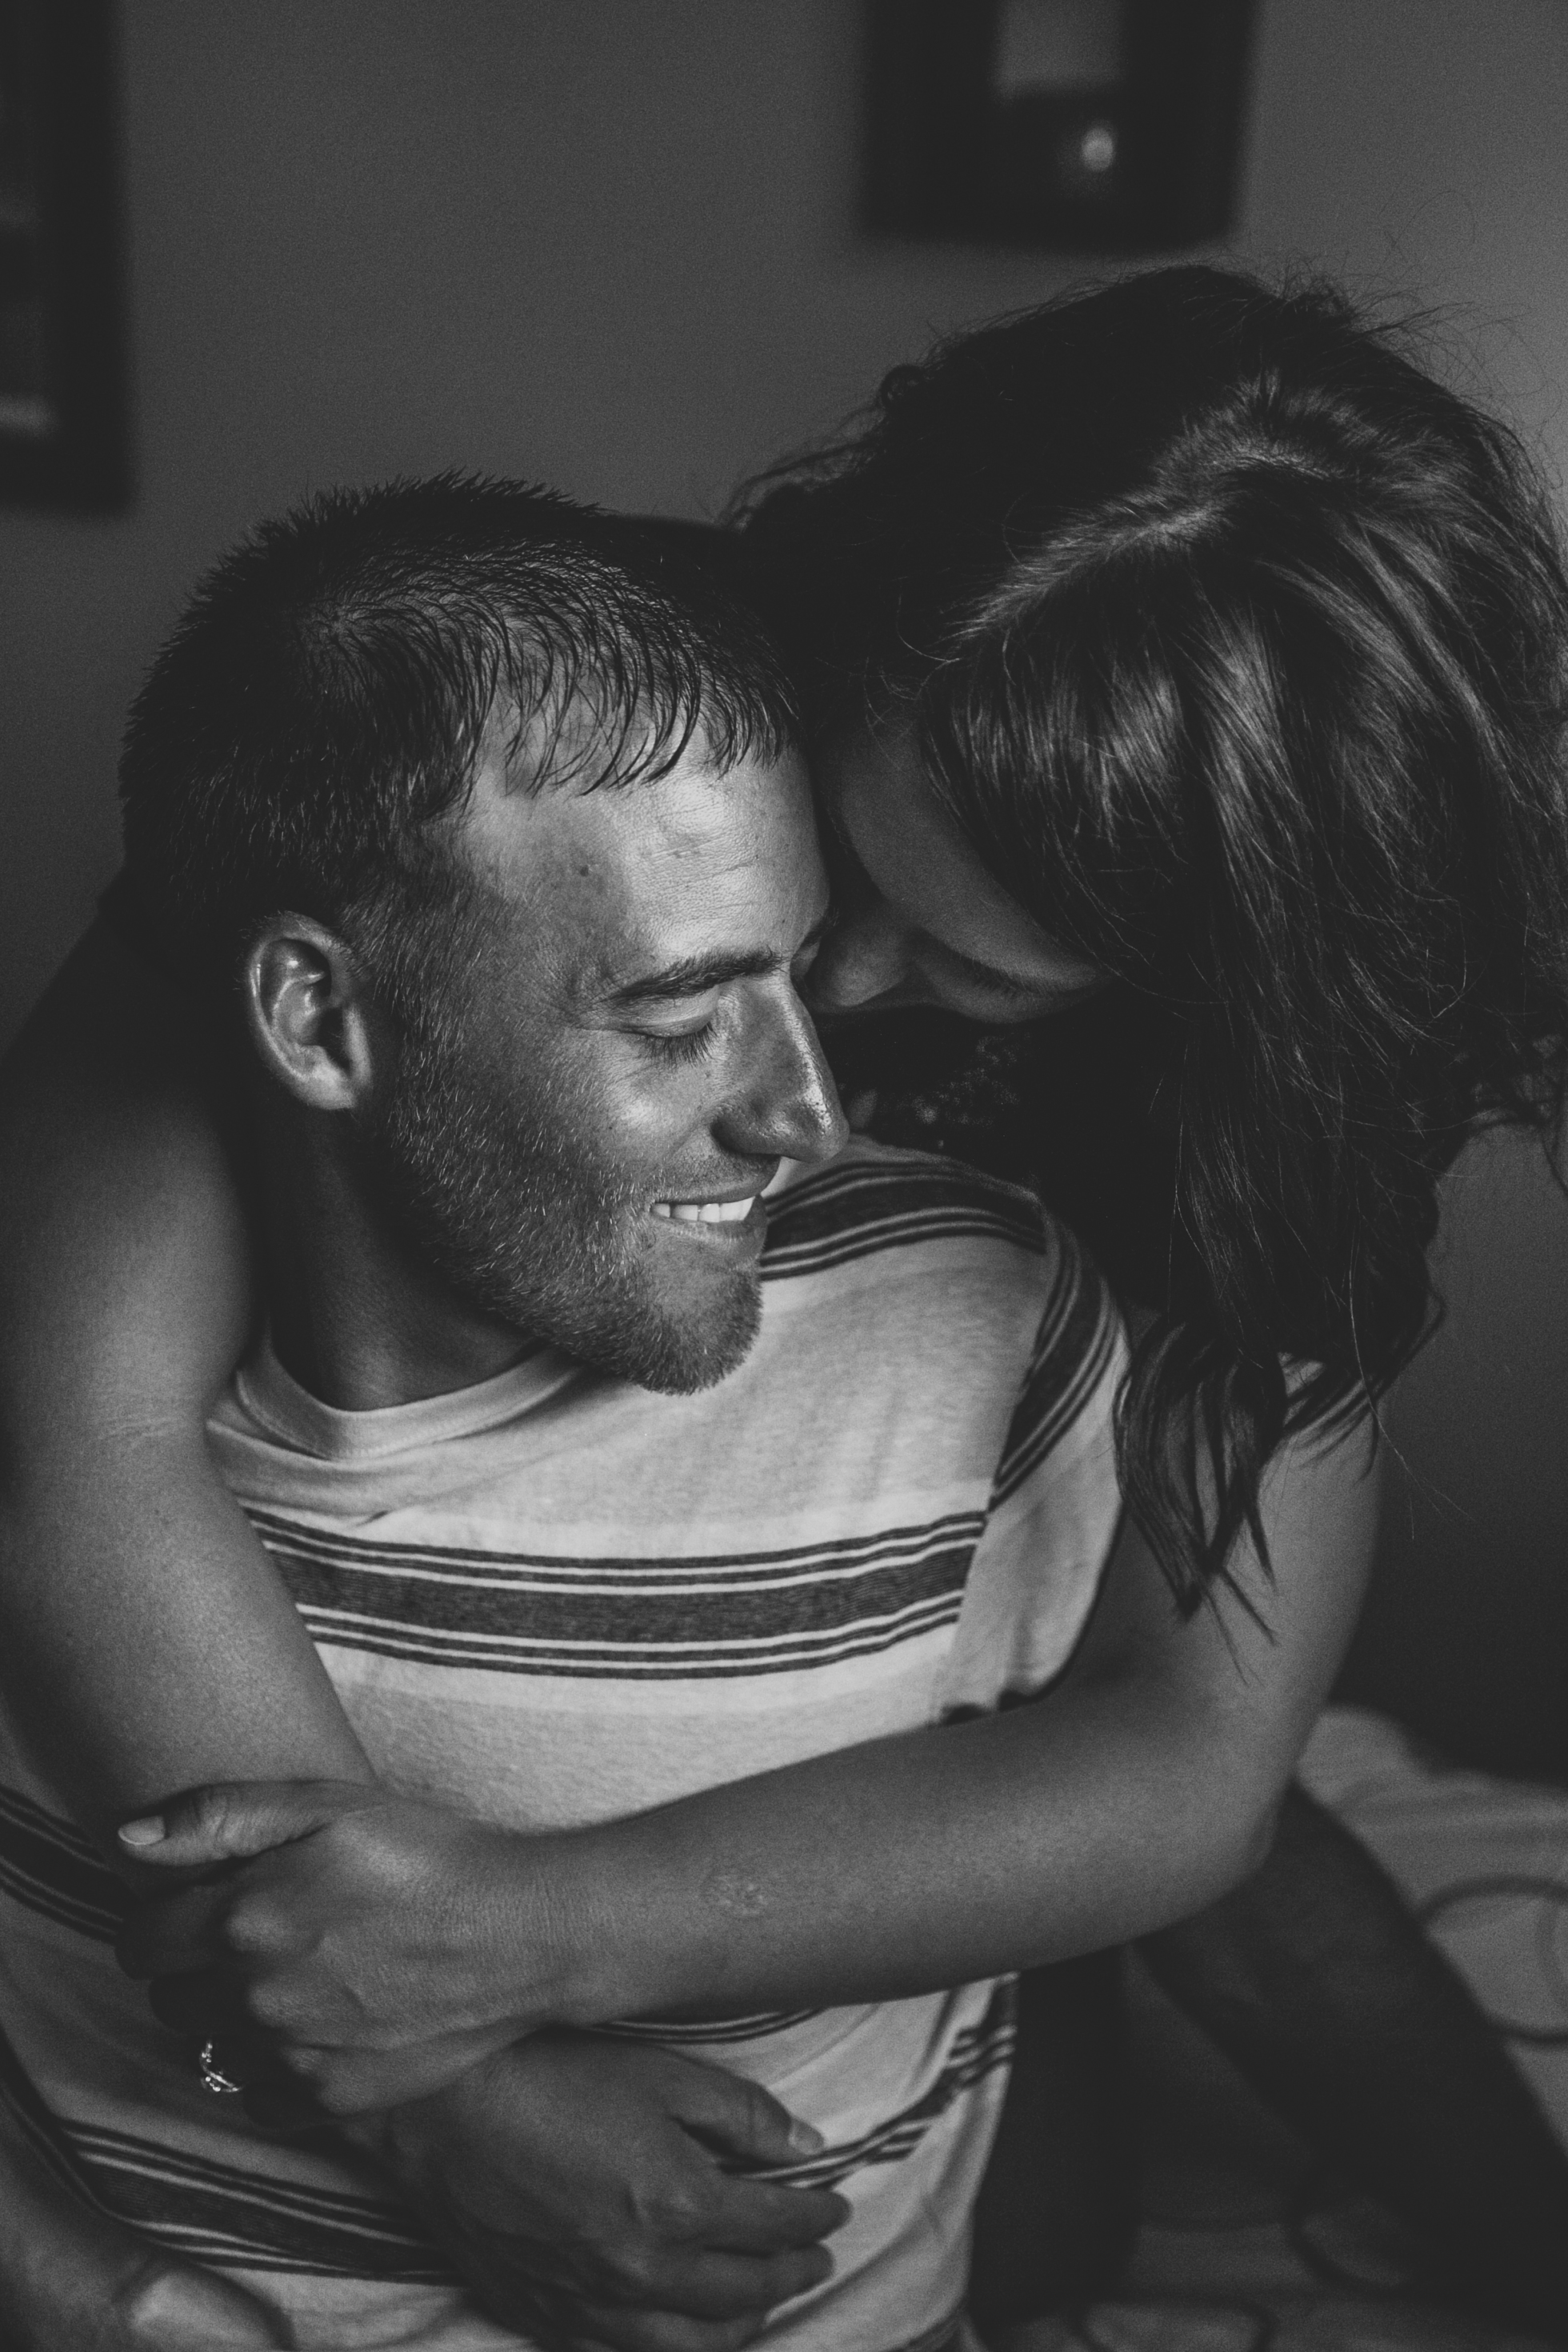 in-home dubuque engagement session by catherine furlin photography, couple sitting in bed